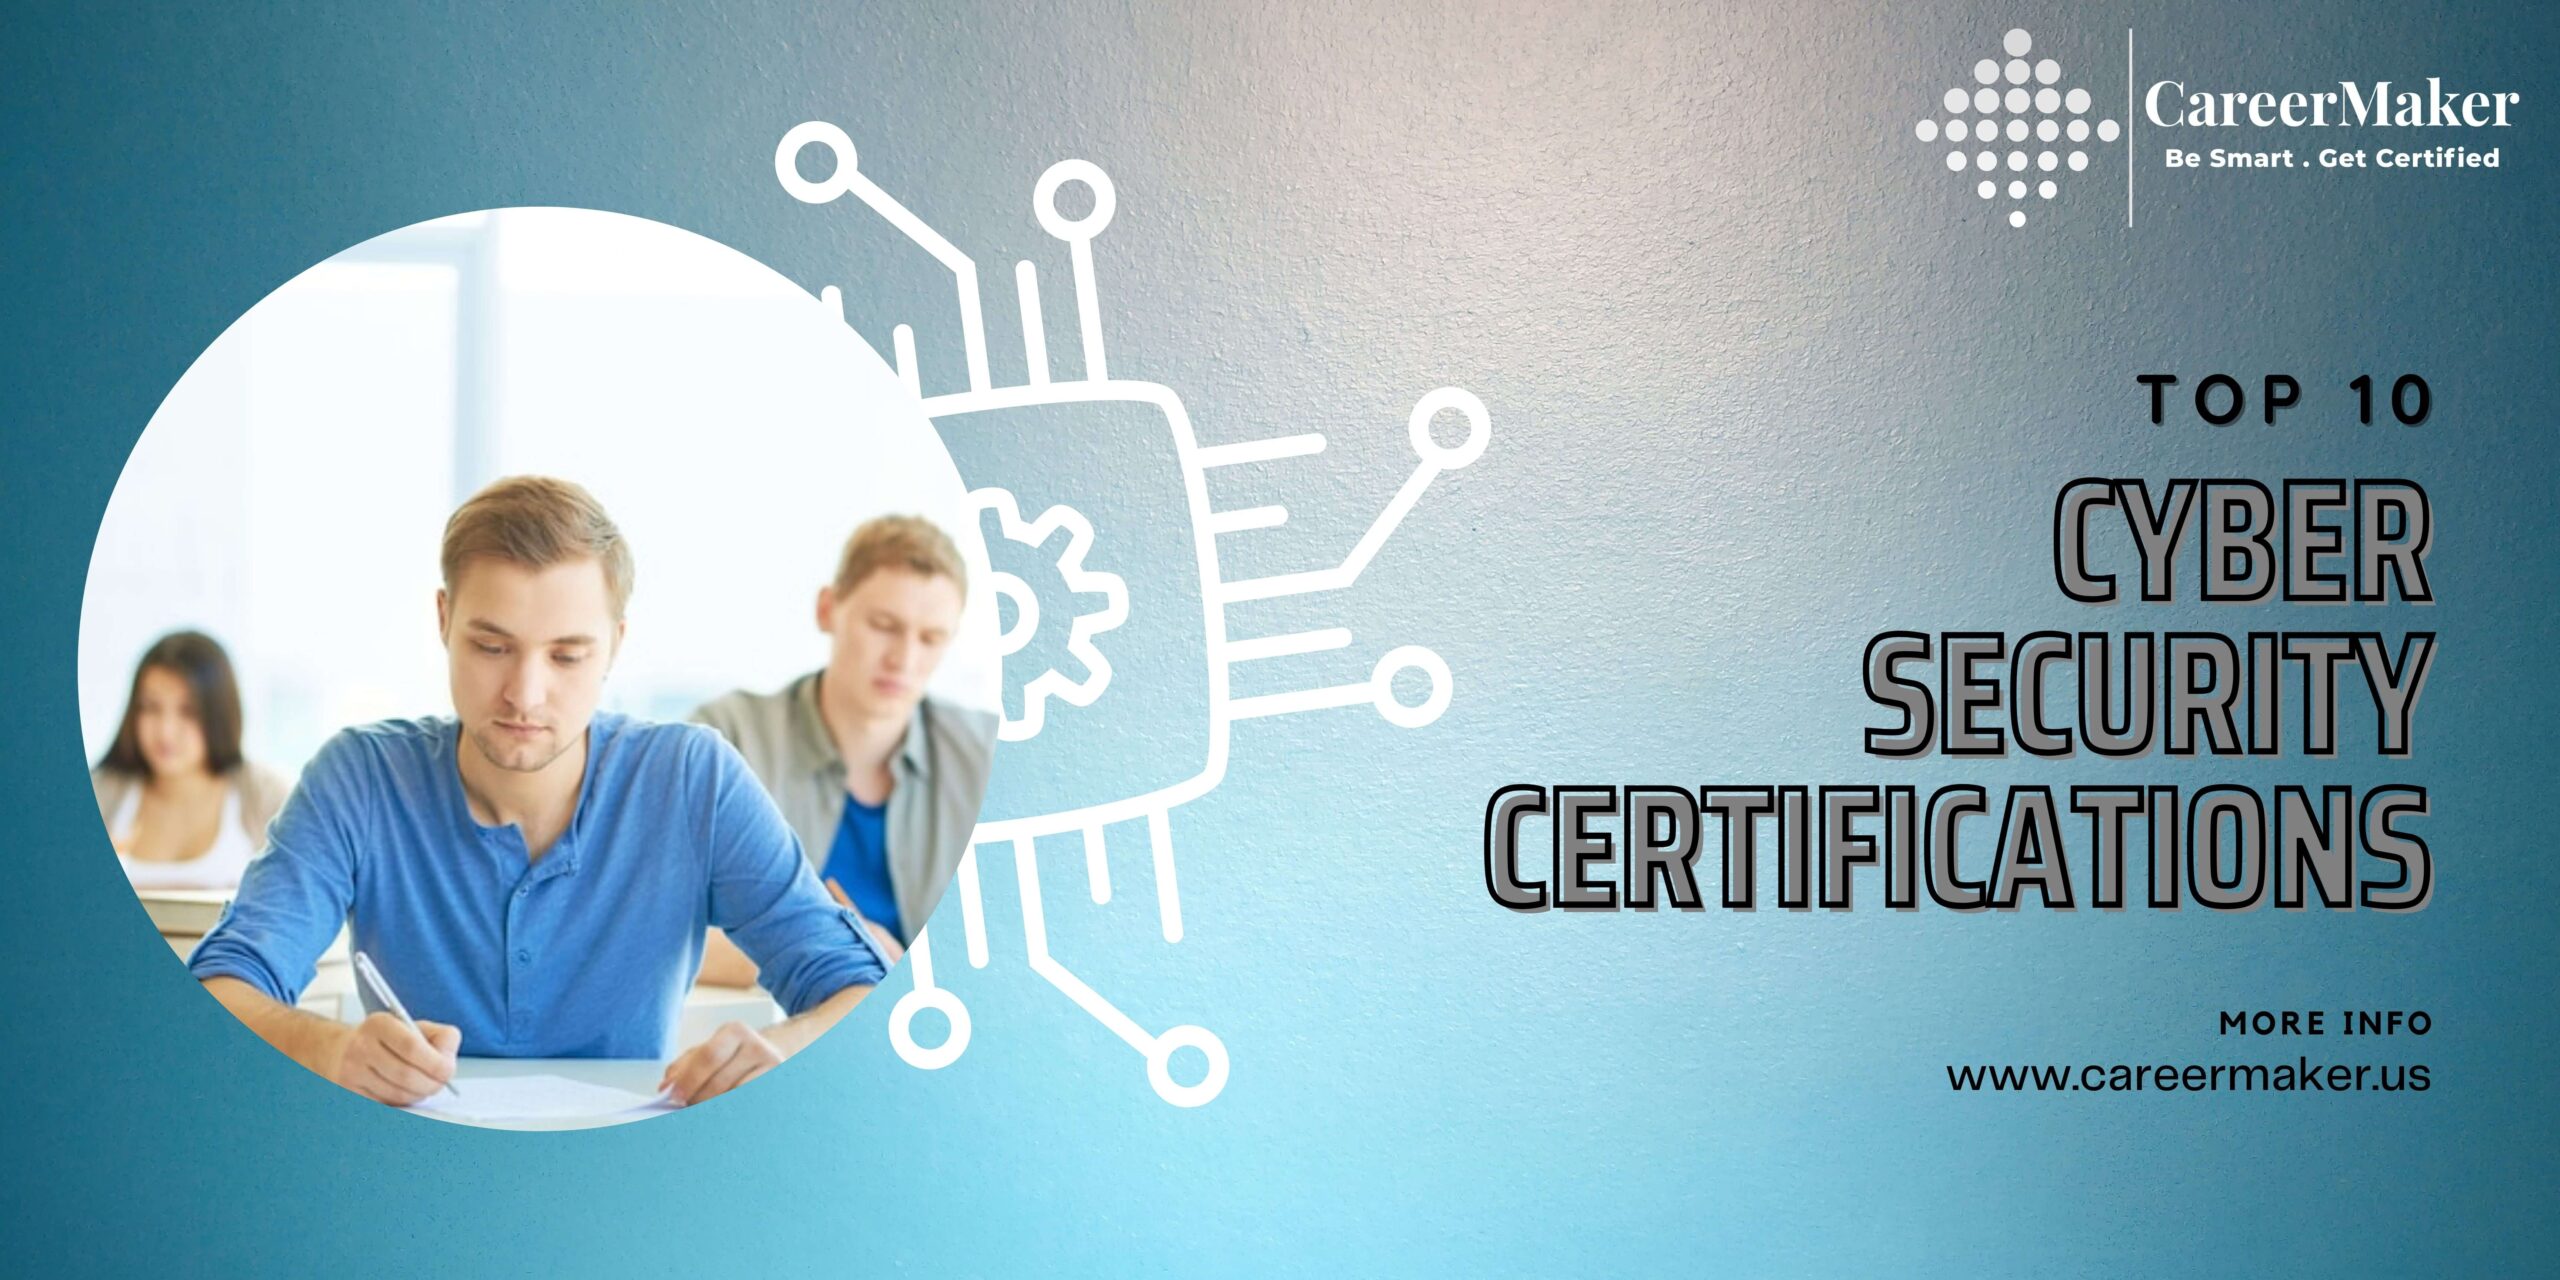 Top 10 Certifications In Cyber Security CareerMaker Solutions